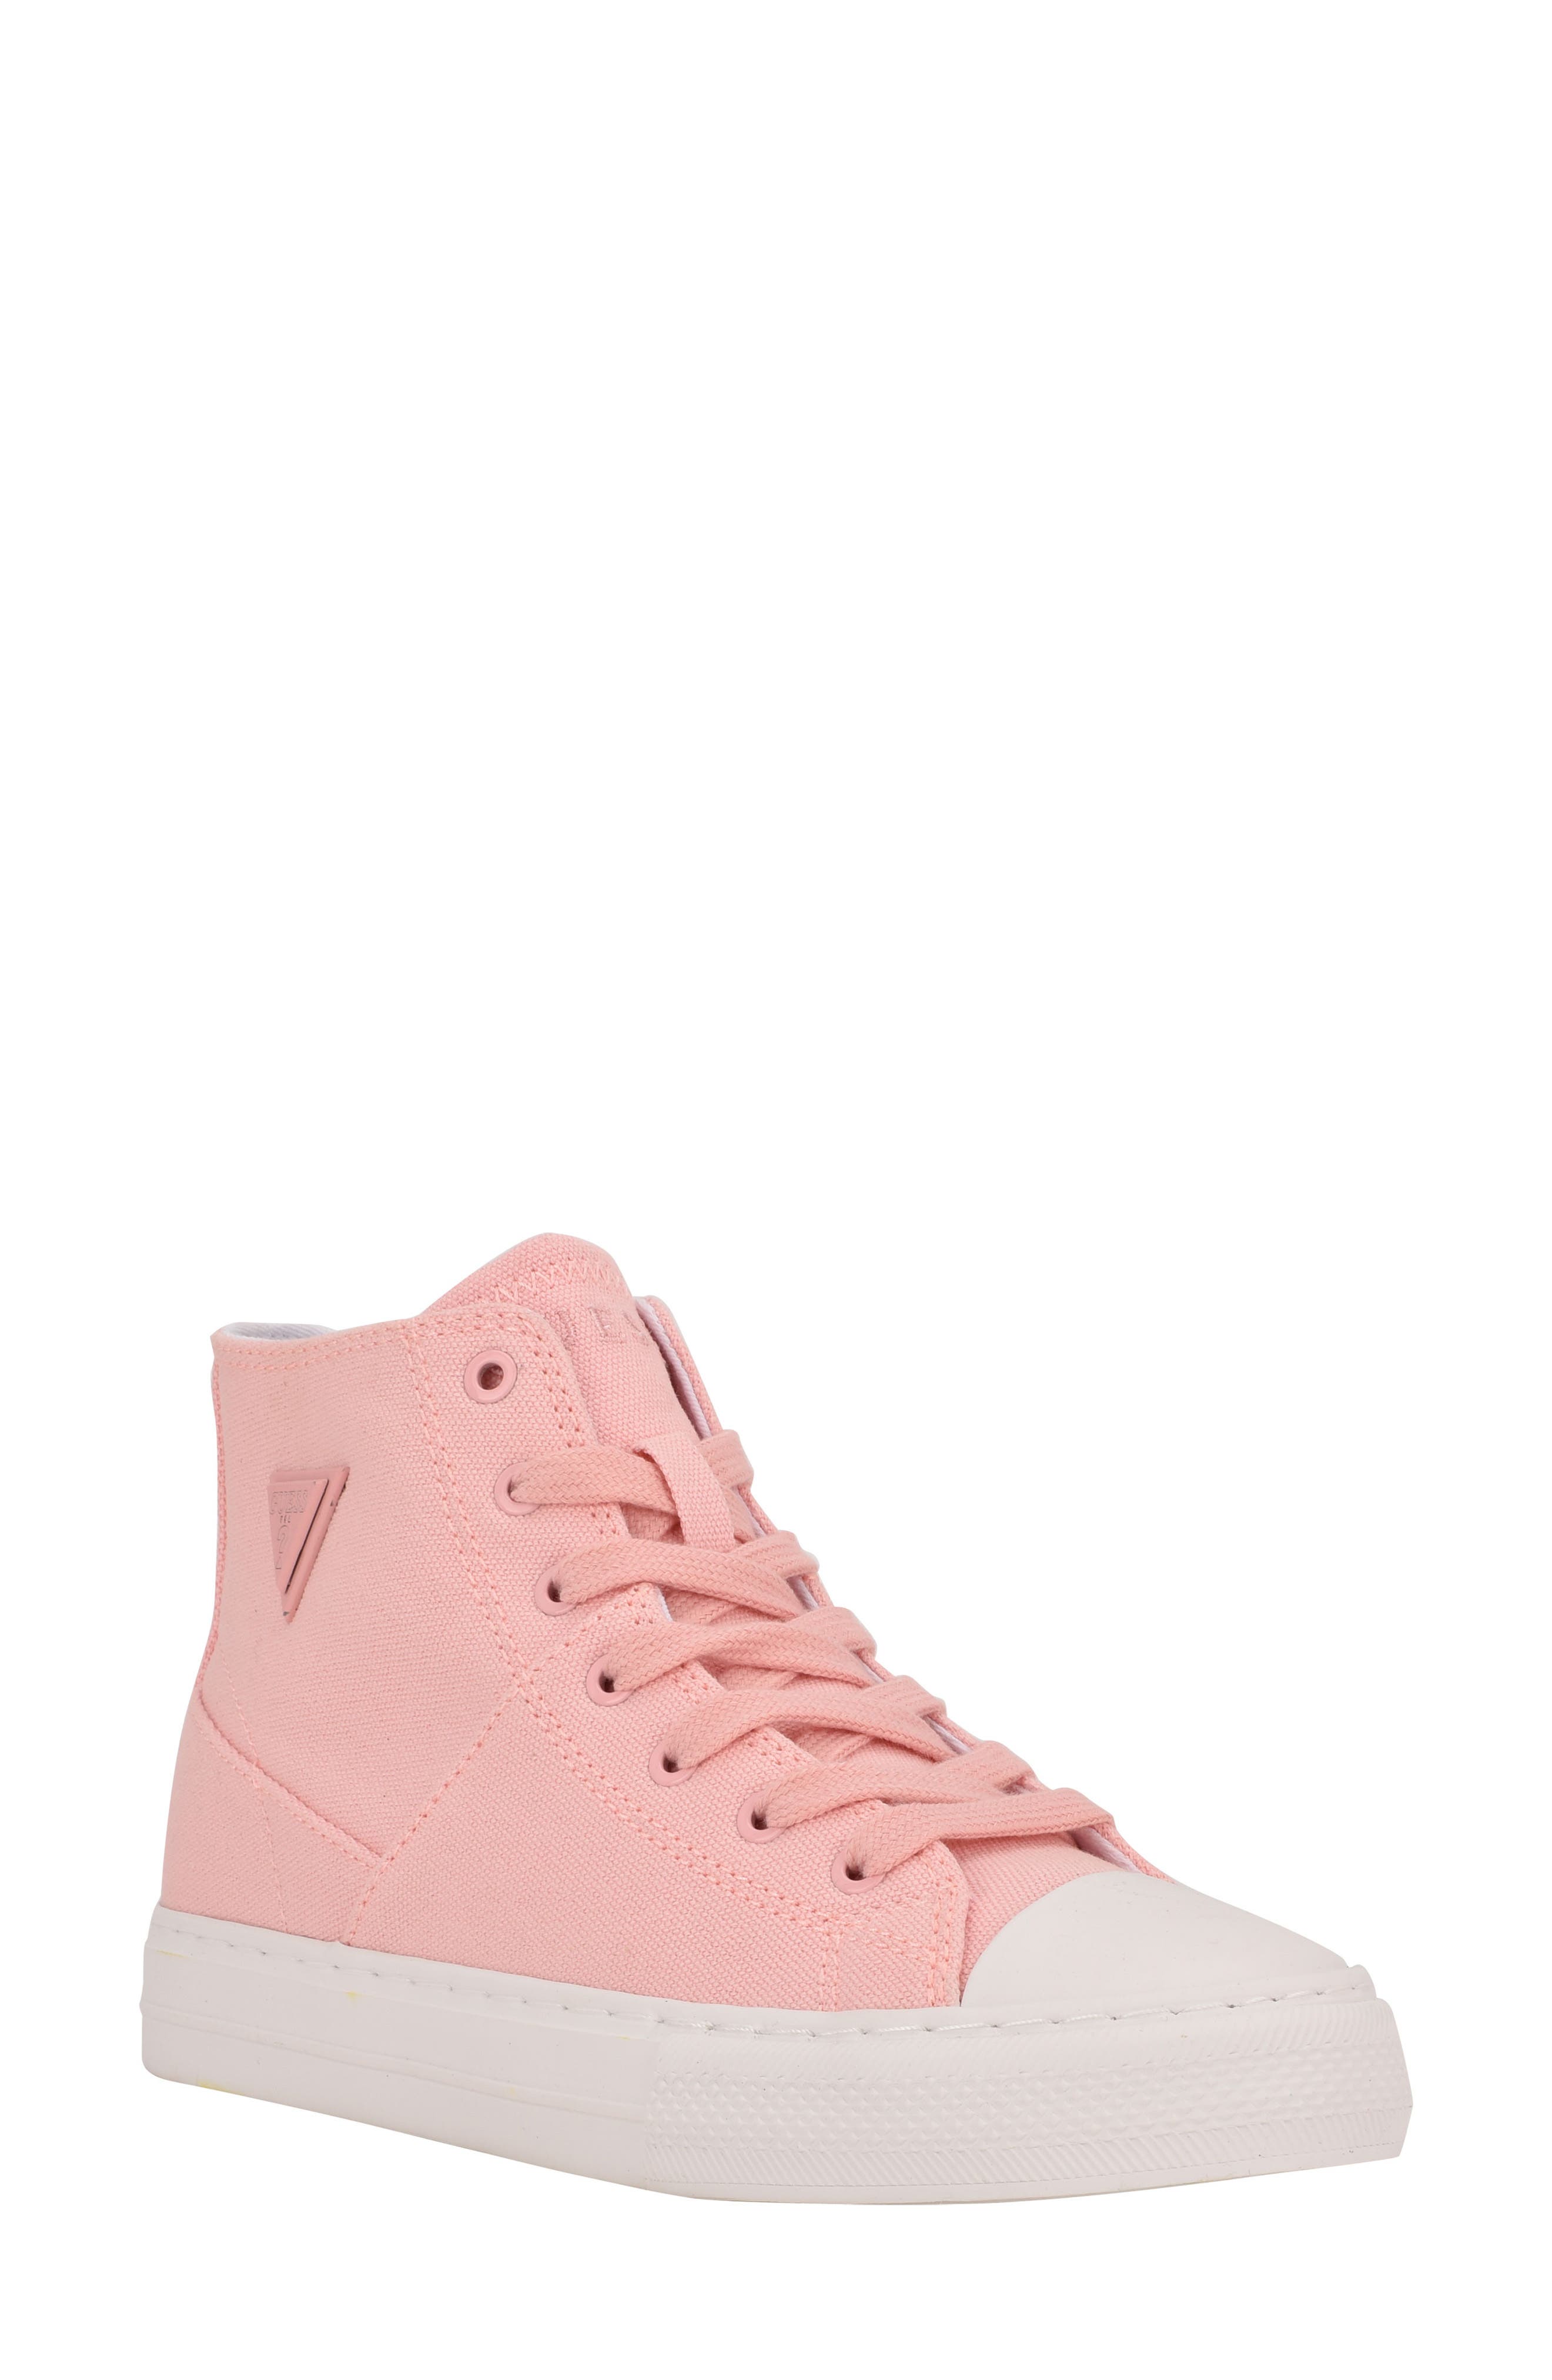 guess high top sneakers womens